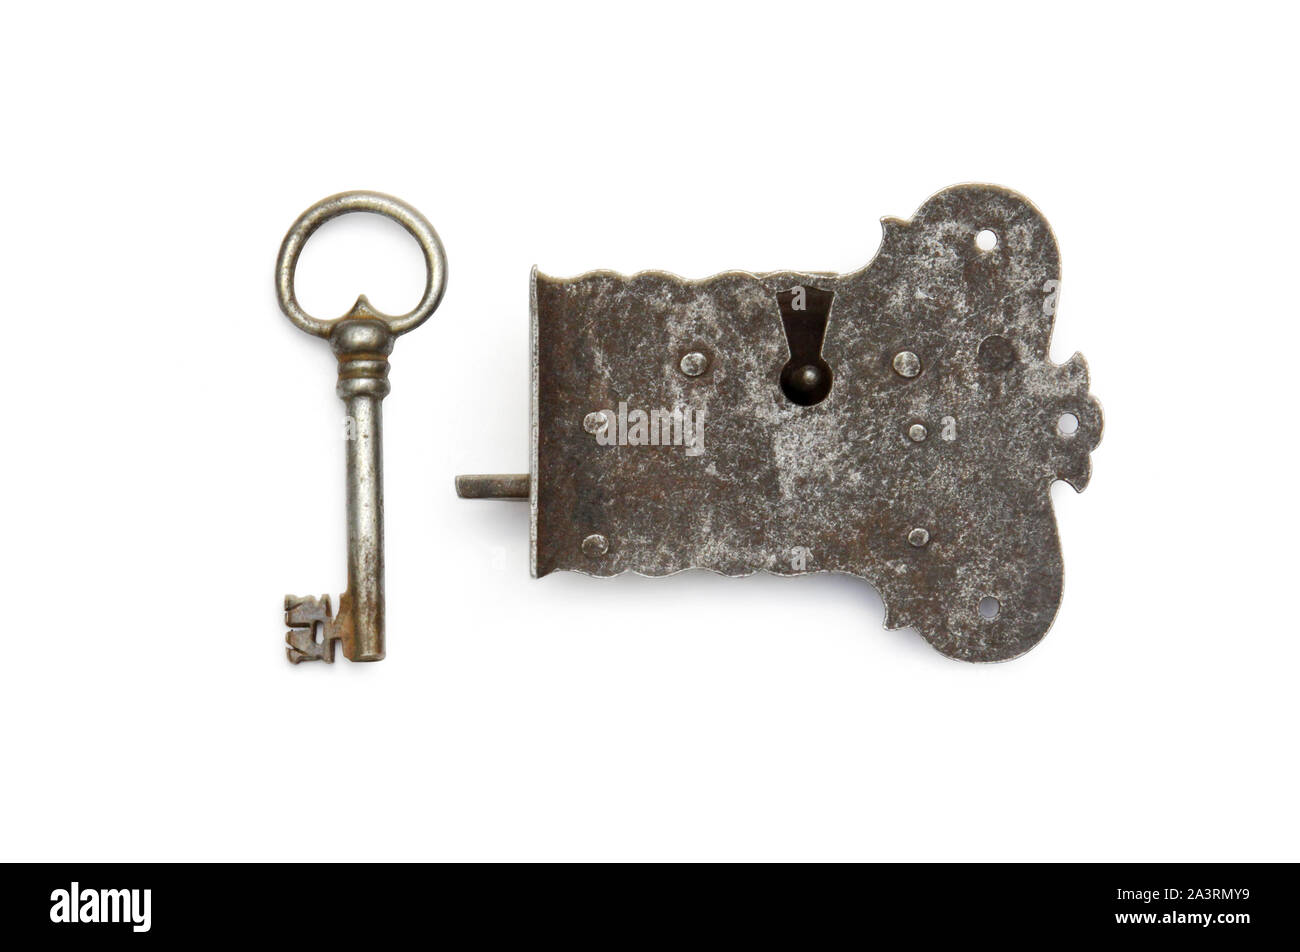 Vintage old lock with key Stock Photo